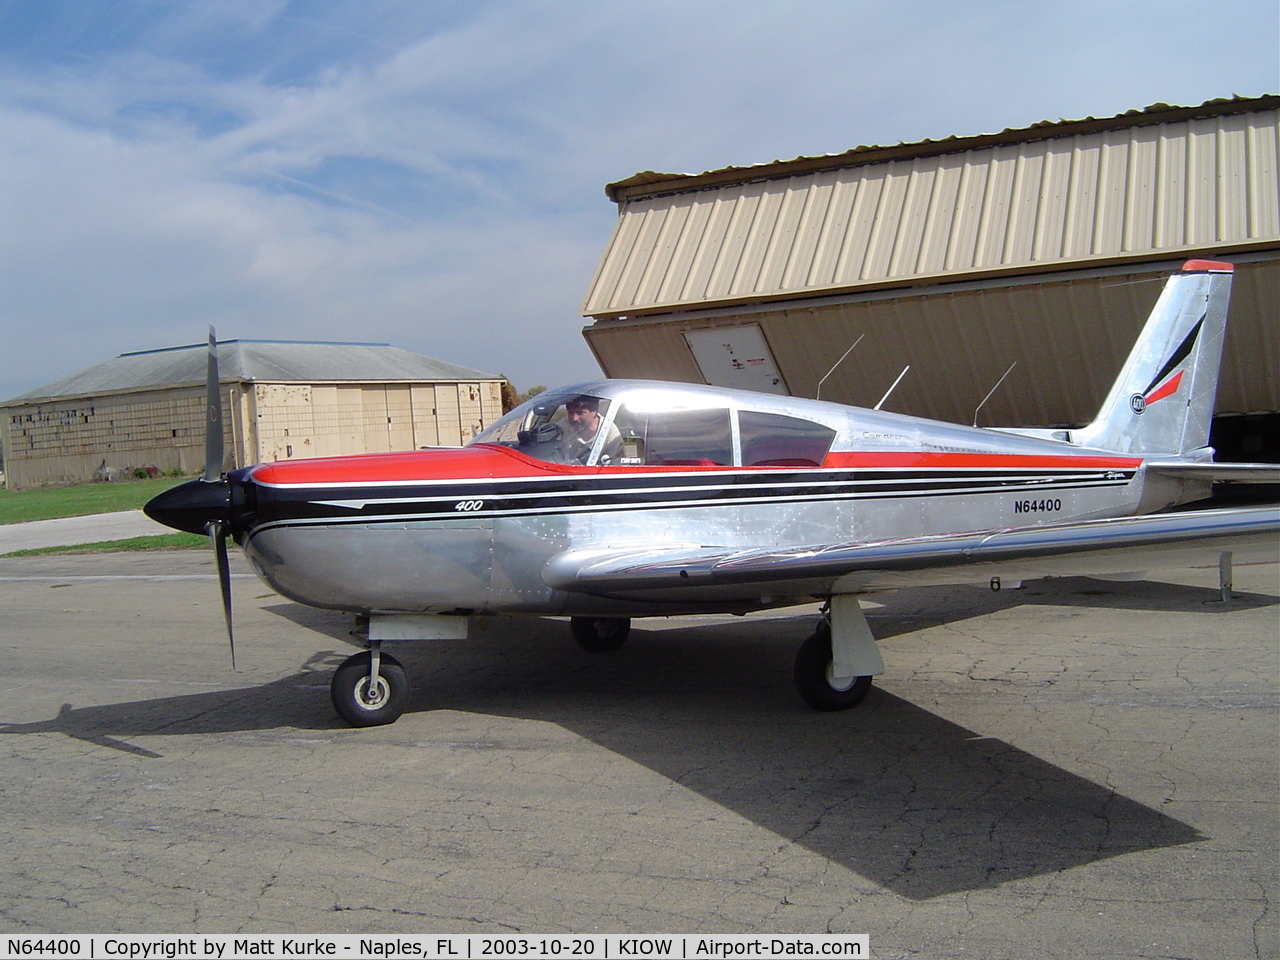 N64400, 1964 Piper PA-24-400 Comanche 400 C/N 26-36, another great 400